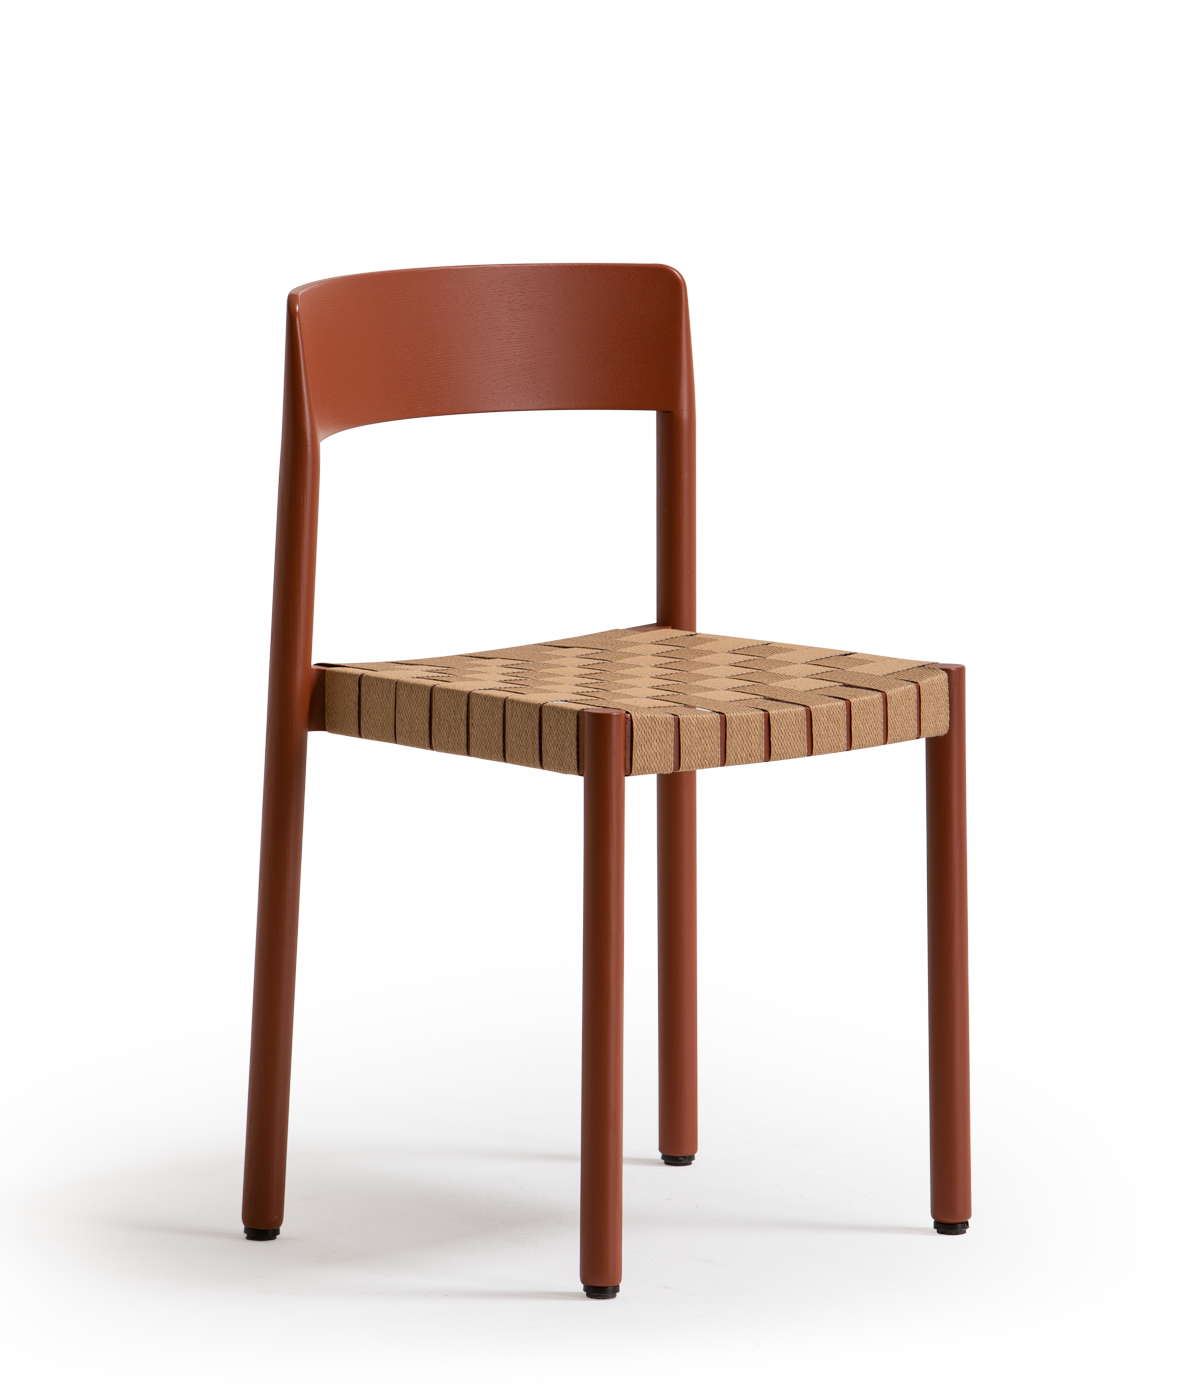 Vergés - Nela chair with seat in wide paper wicker